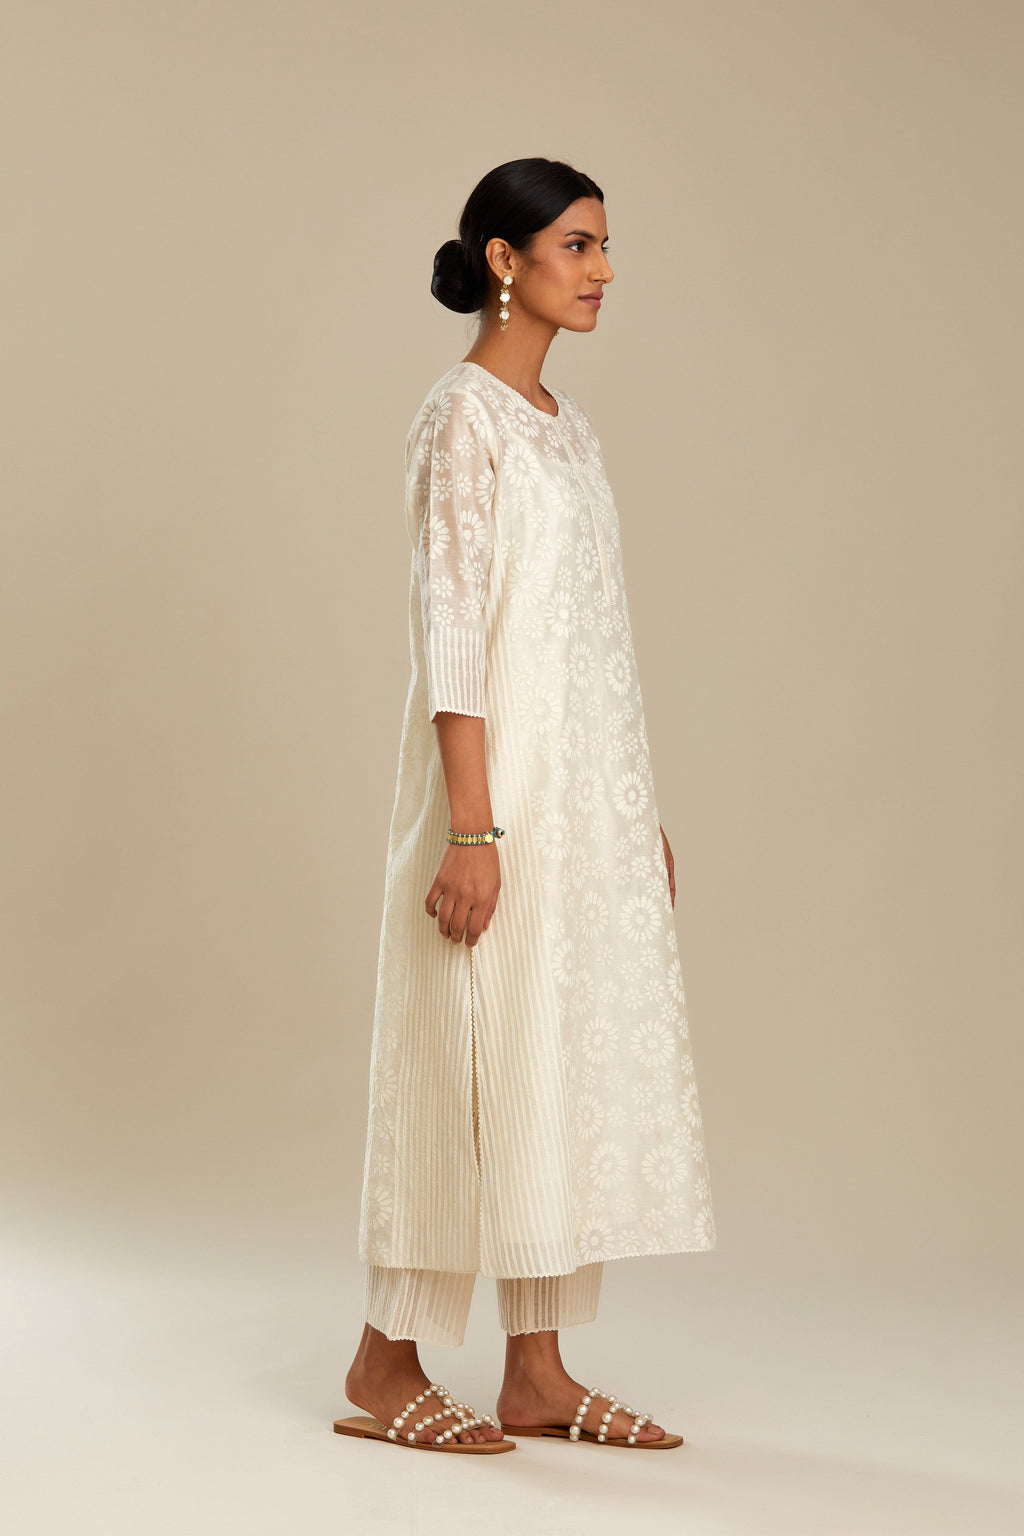 Off white silk chanderi straight kurta set with floral appliqué in center panel and striped cutwork at the sides.